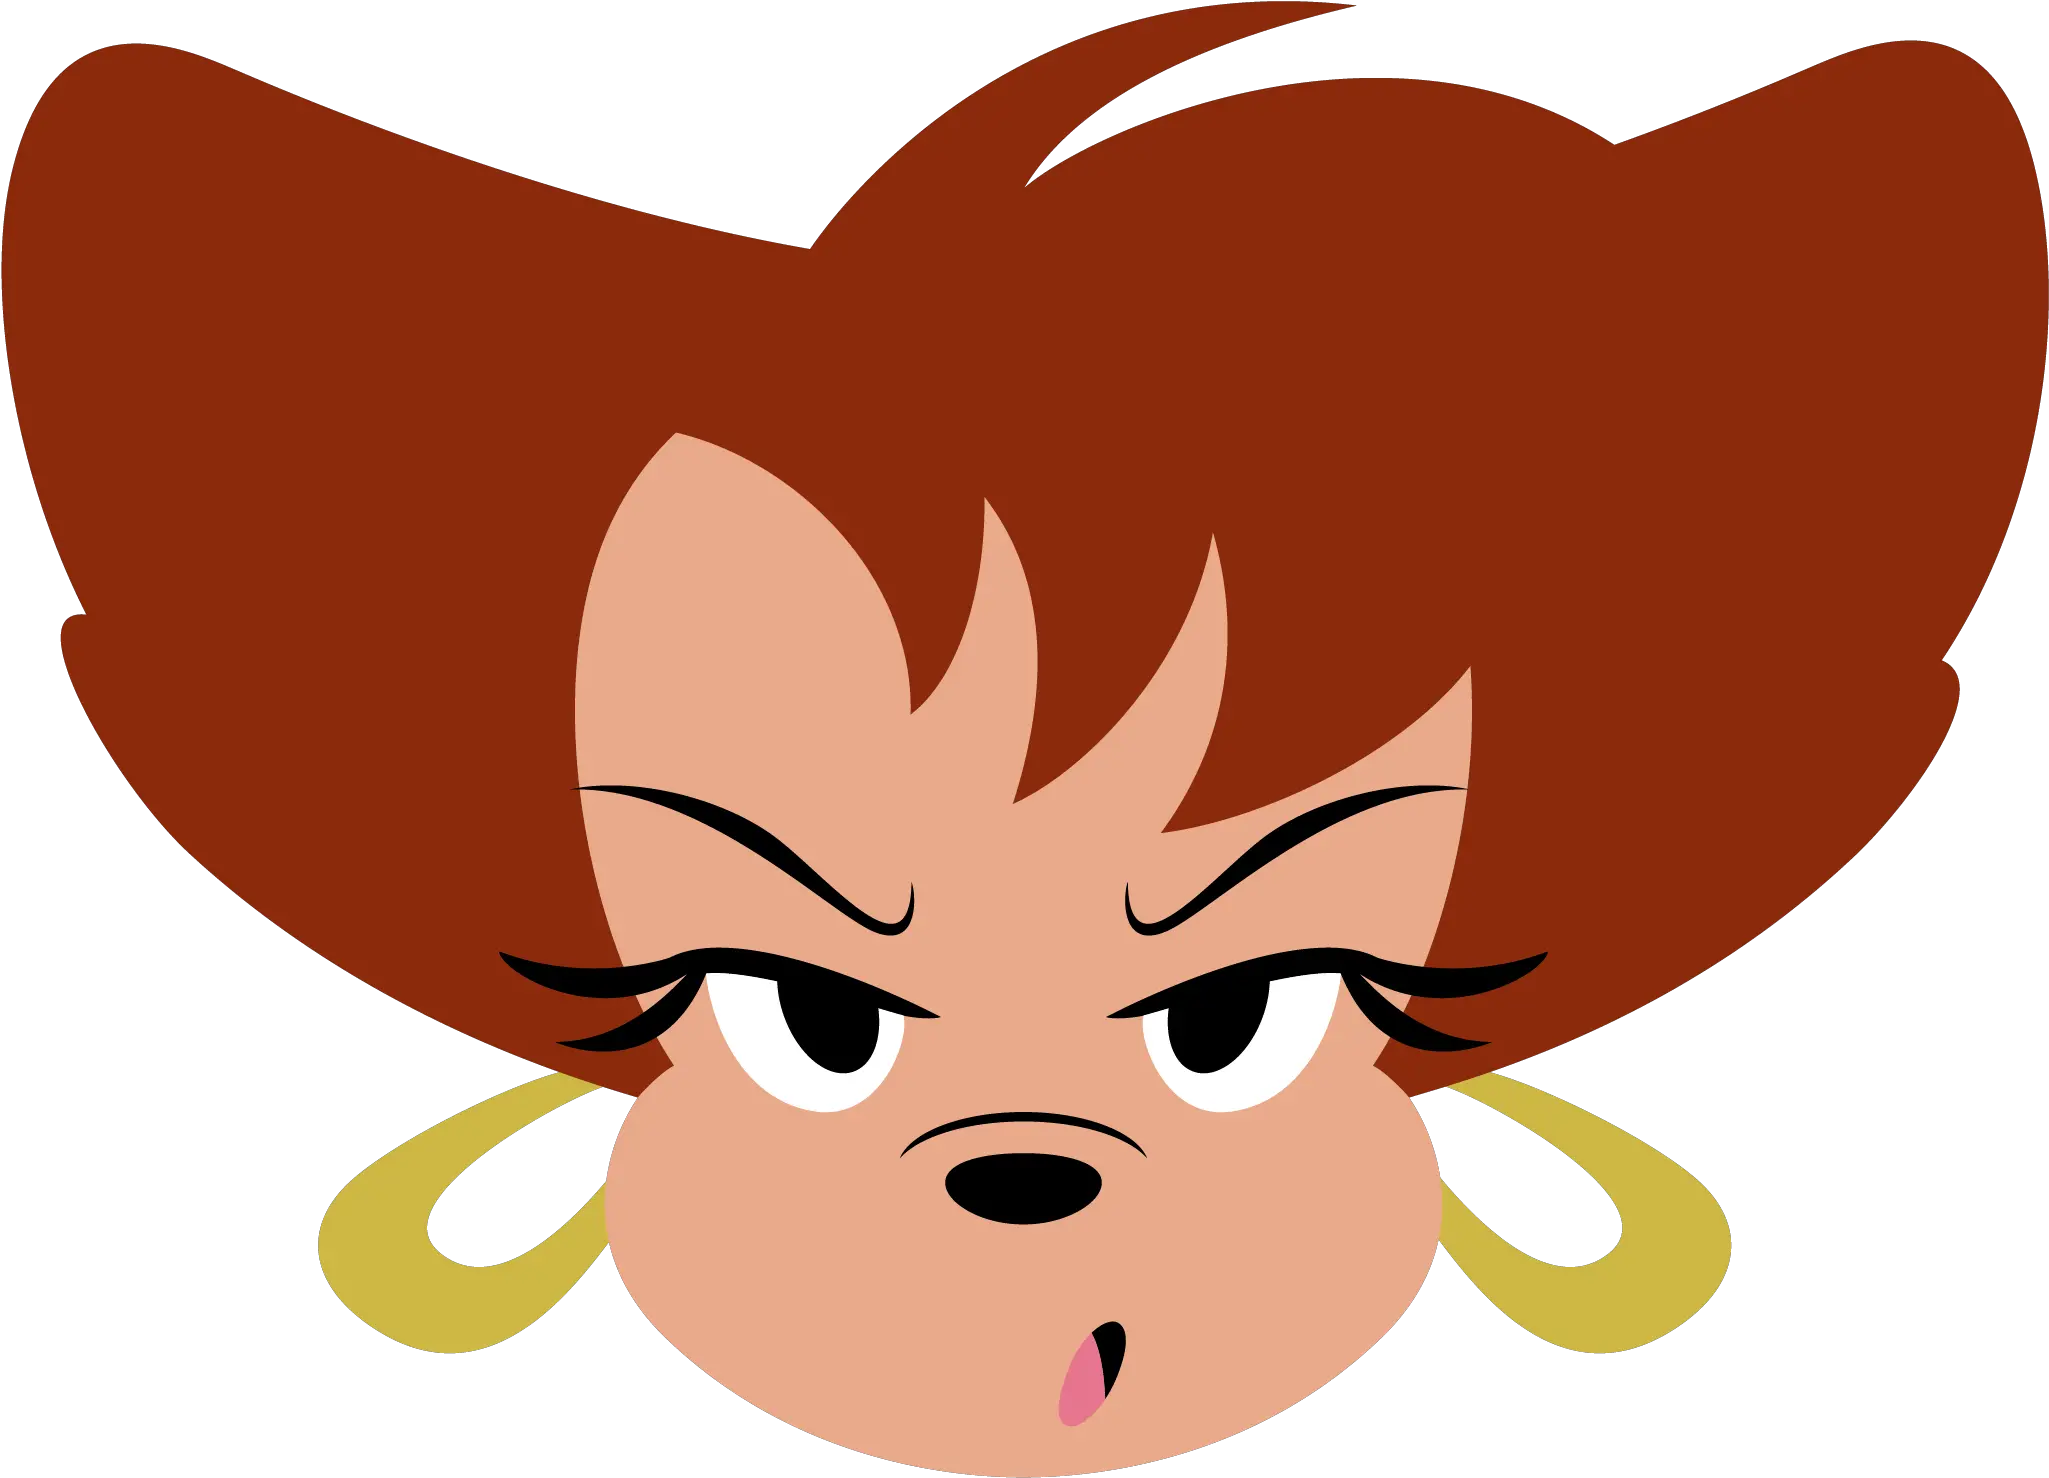 Goof Troop By Ico Non On Newgrounds Fictional Character Png Animation Folder Icon